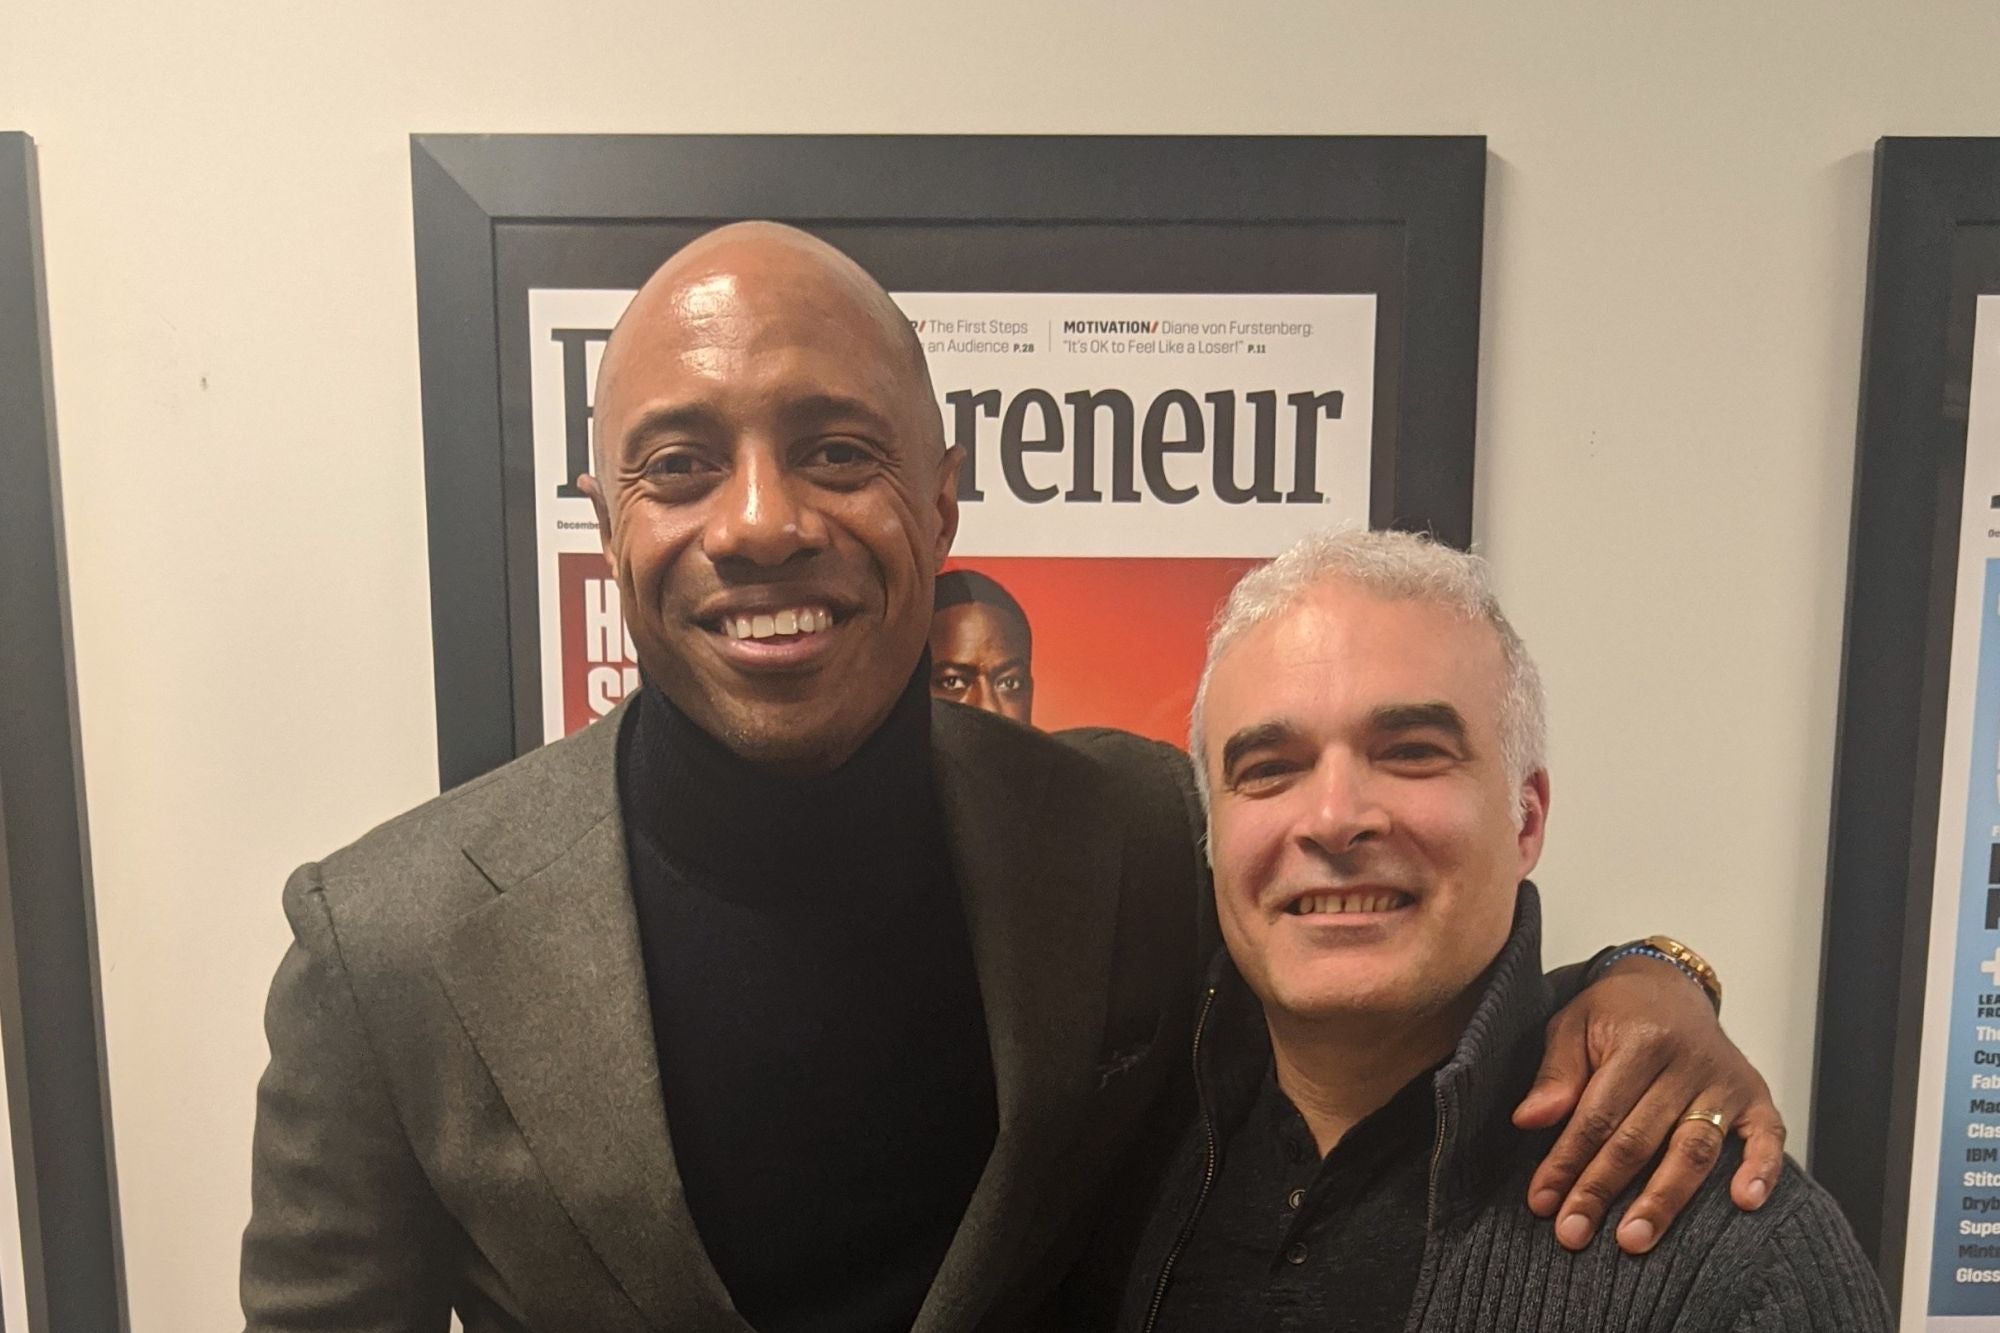 Jay Williams: NBA, ESPN Analyst and Entrepreneur – Suiting Up